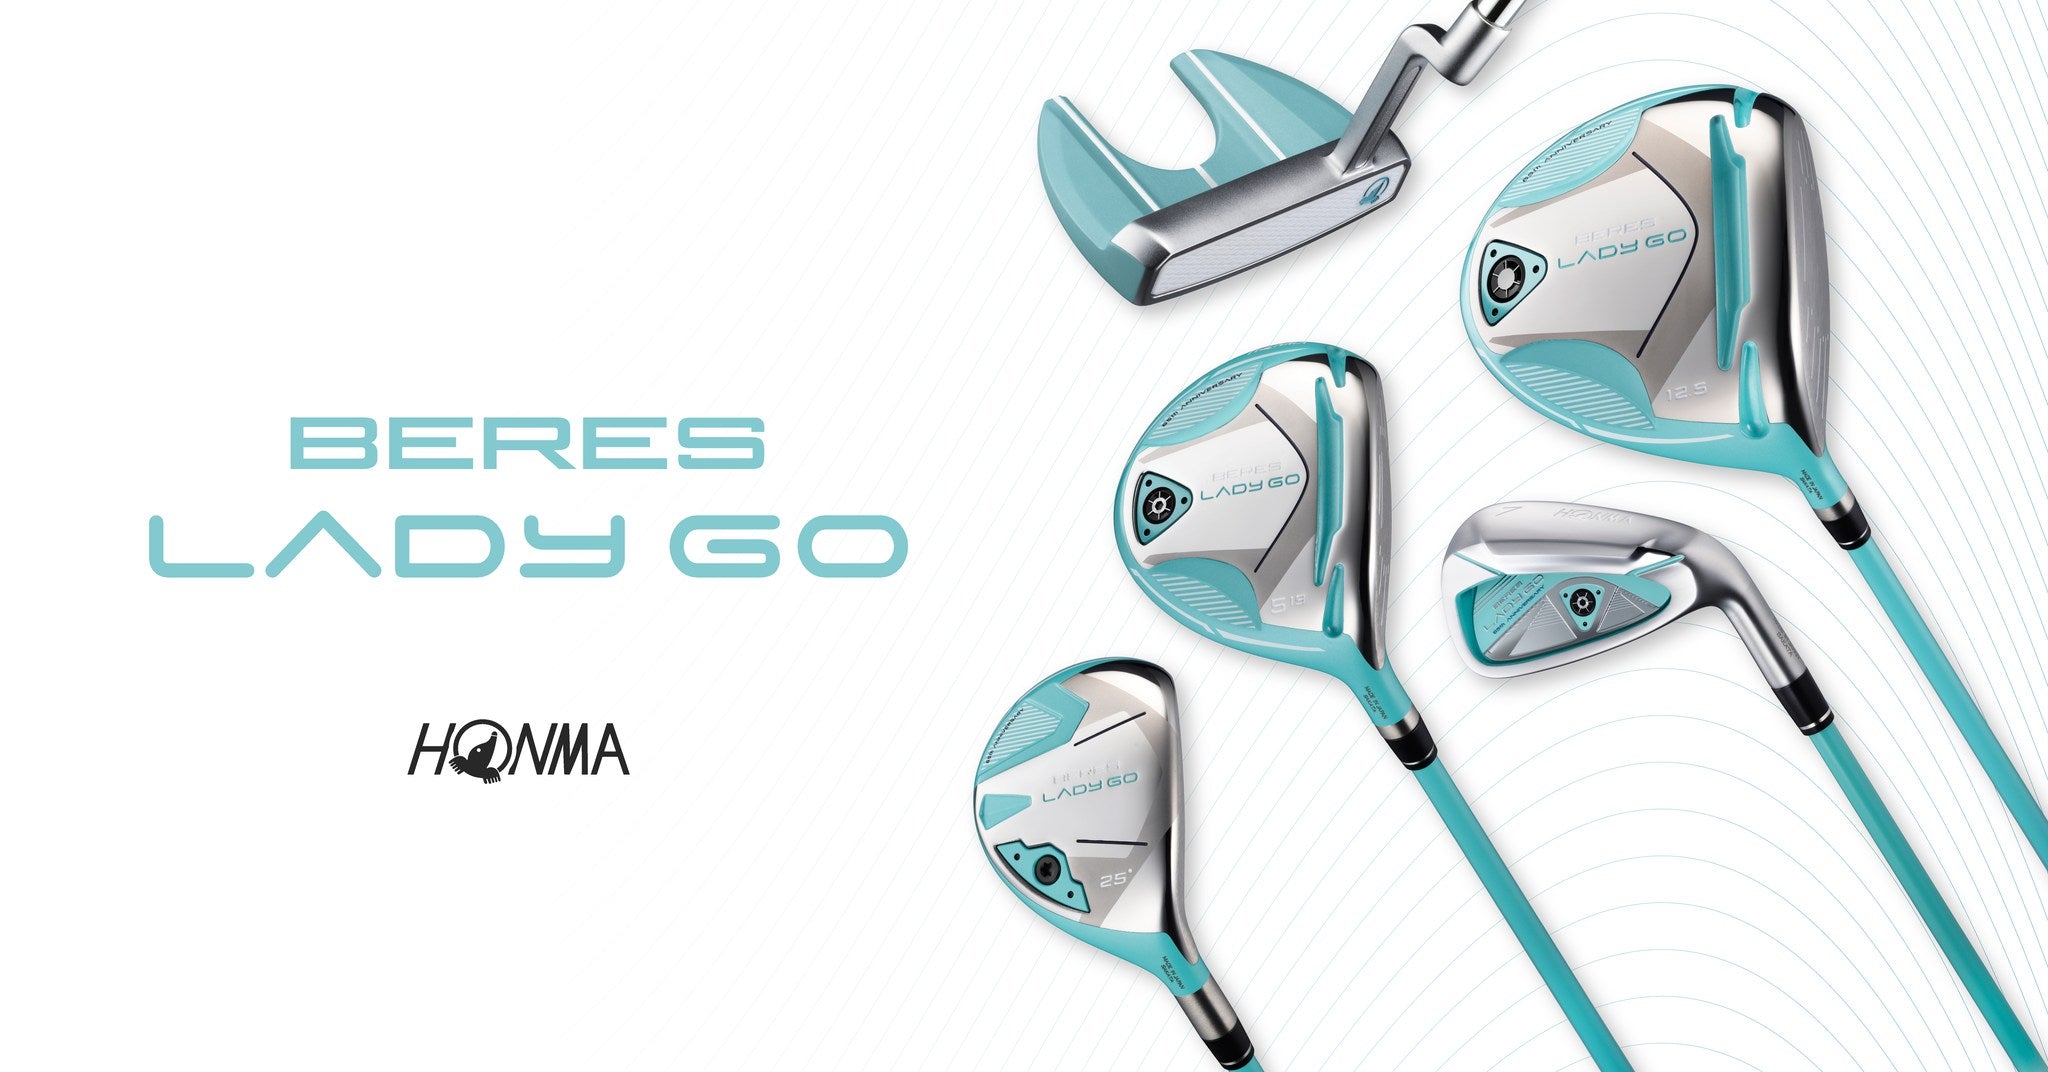 honma-beres-lady-go-set-limited-edition-package-set